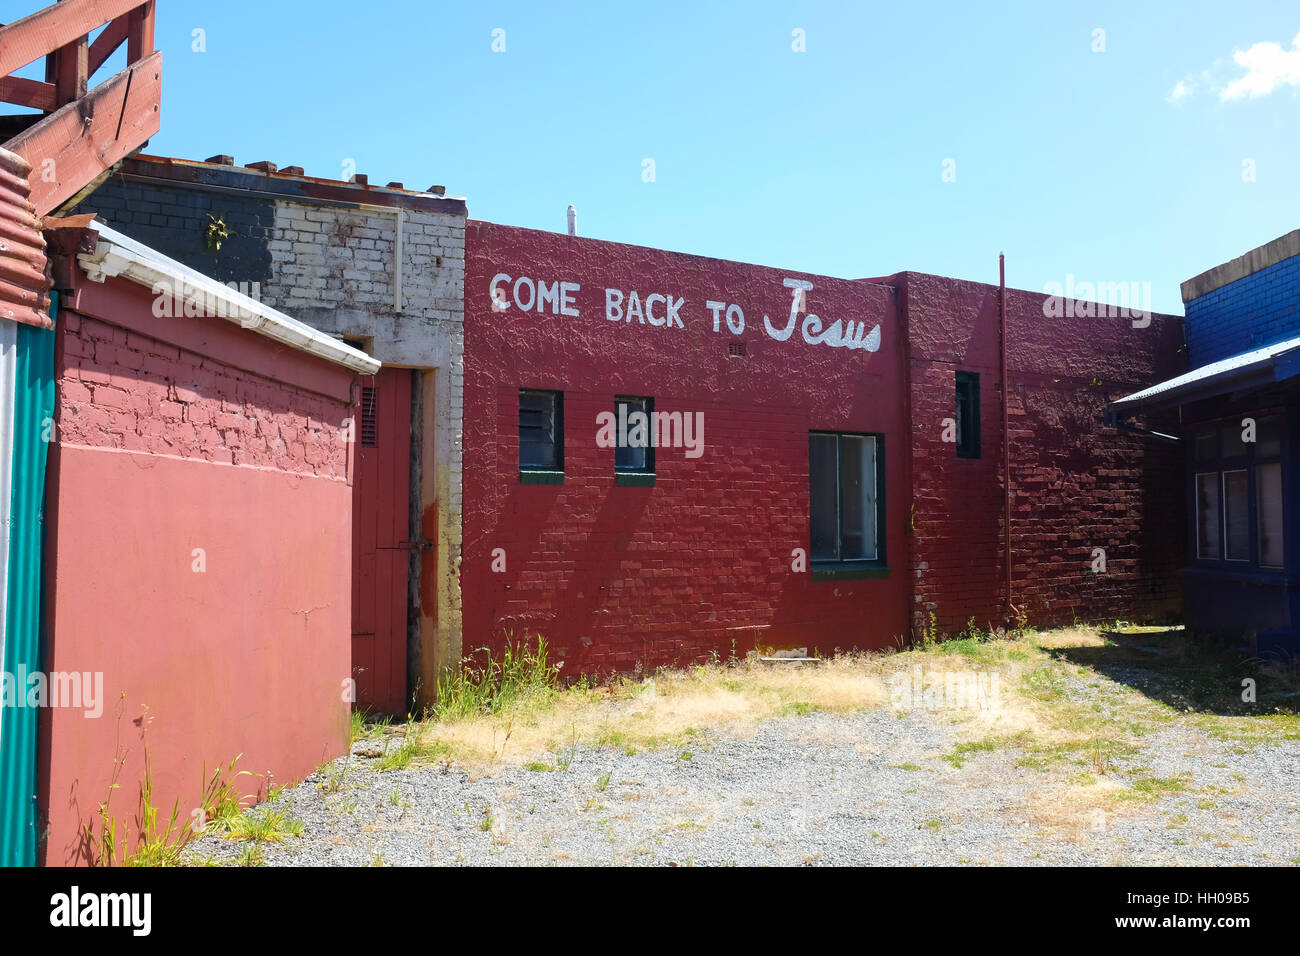 'Come back to Jesus' written on the side of a building in Greymouth, New Zealand. Stock Photo